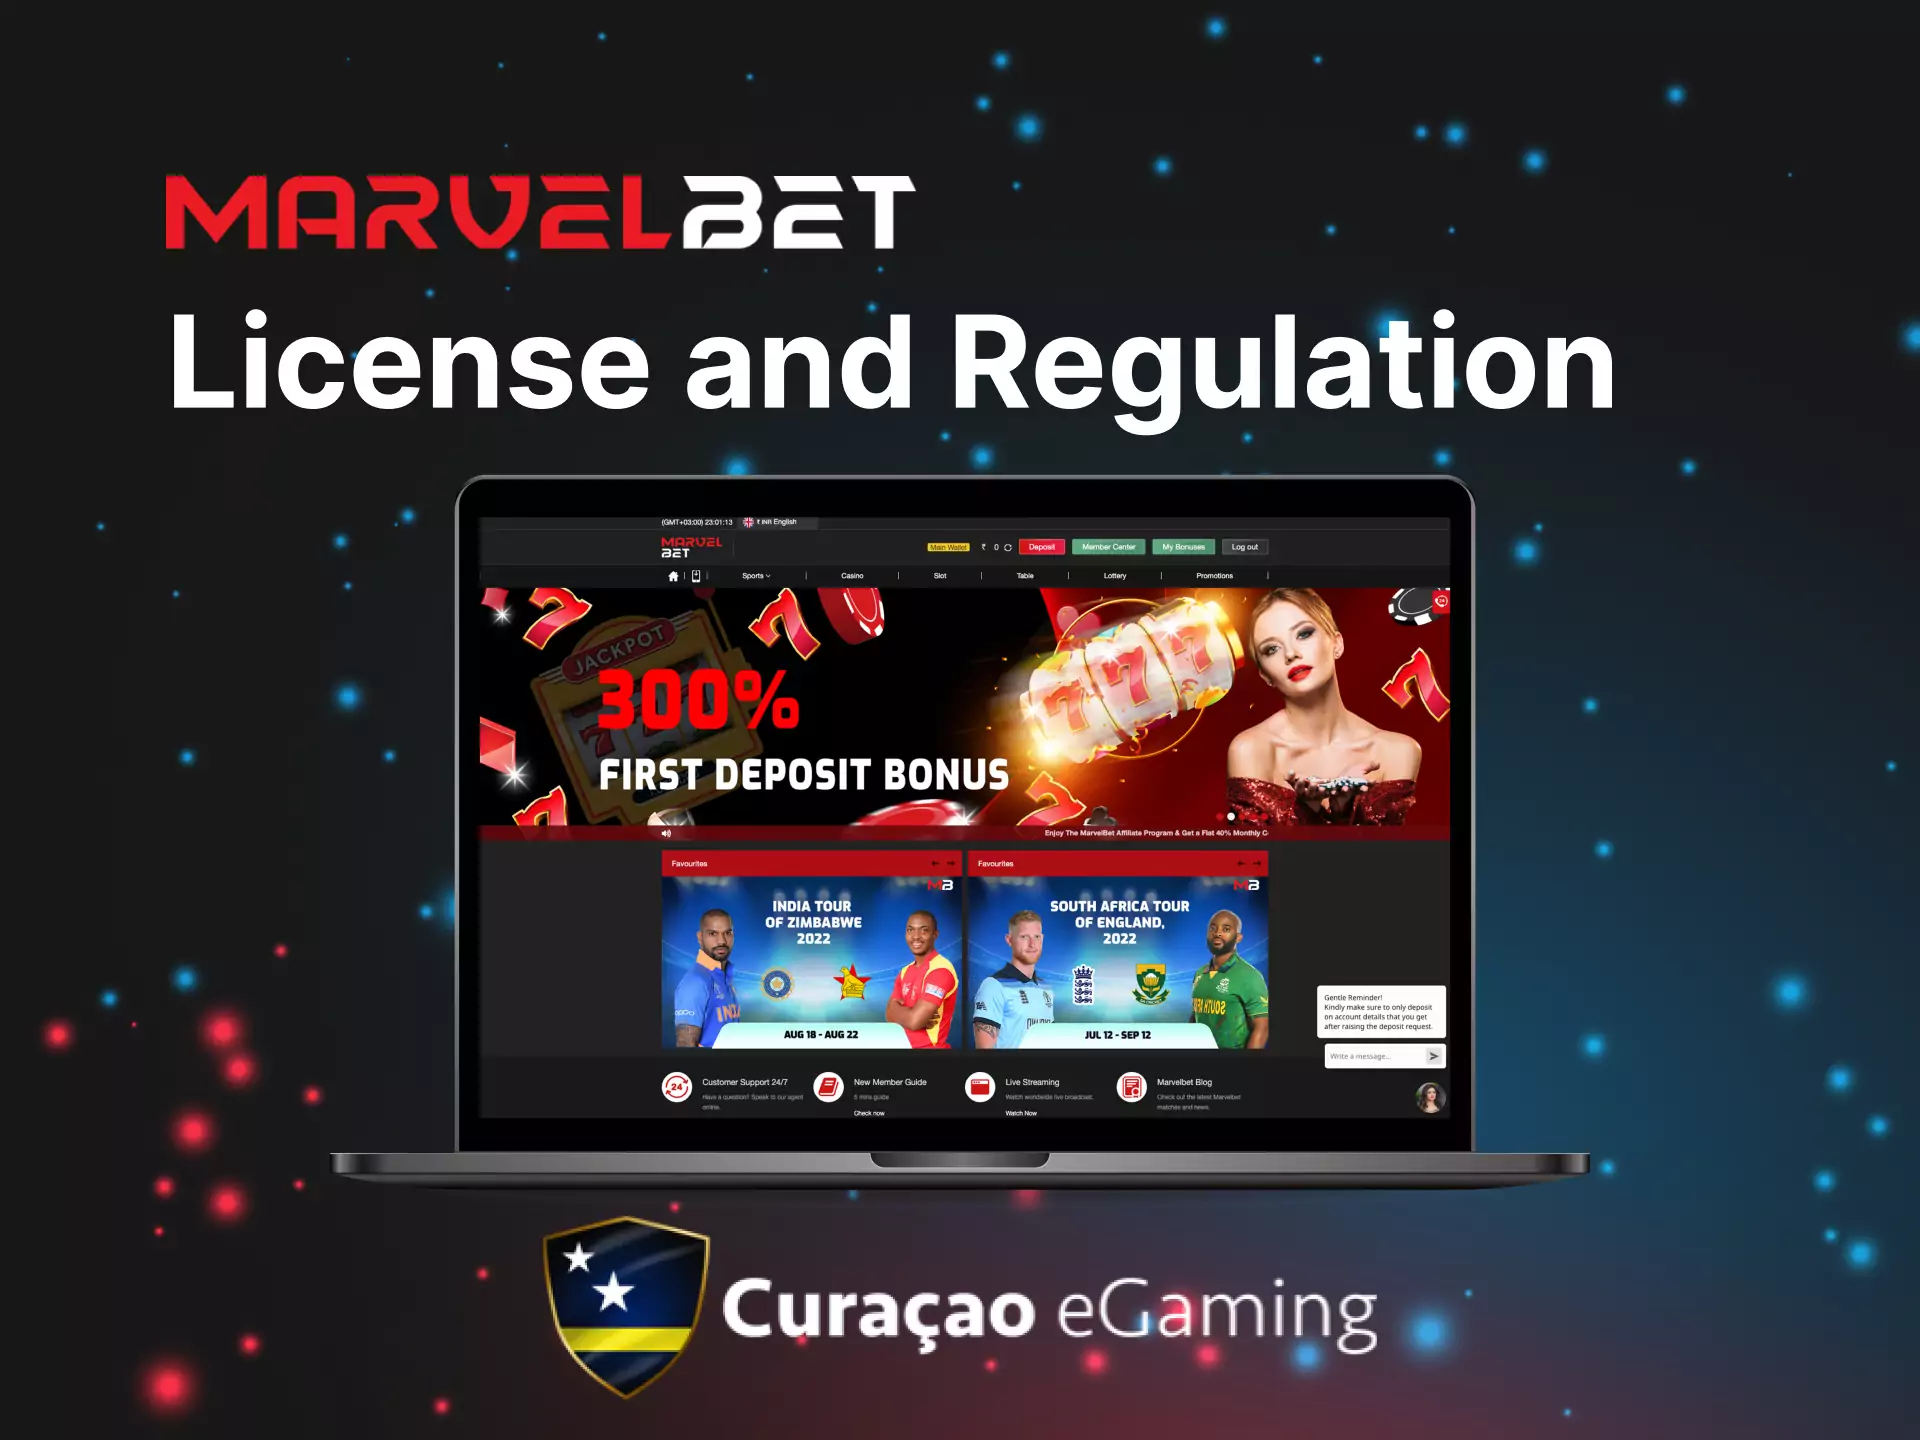 Marvelbet has been verified by the Curacao Egaming.